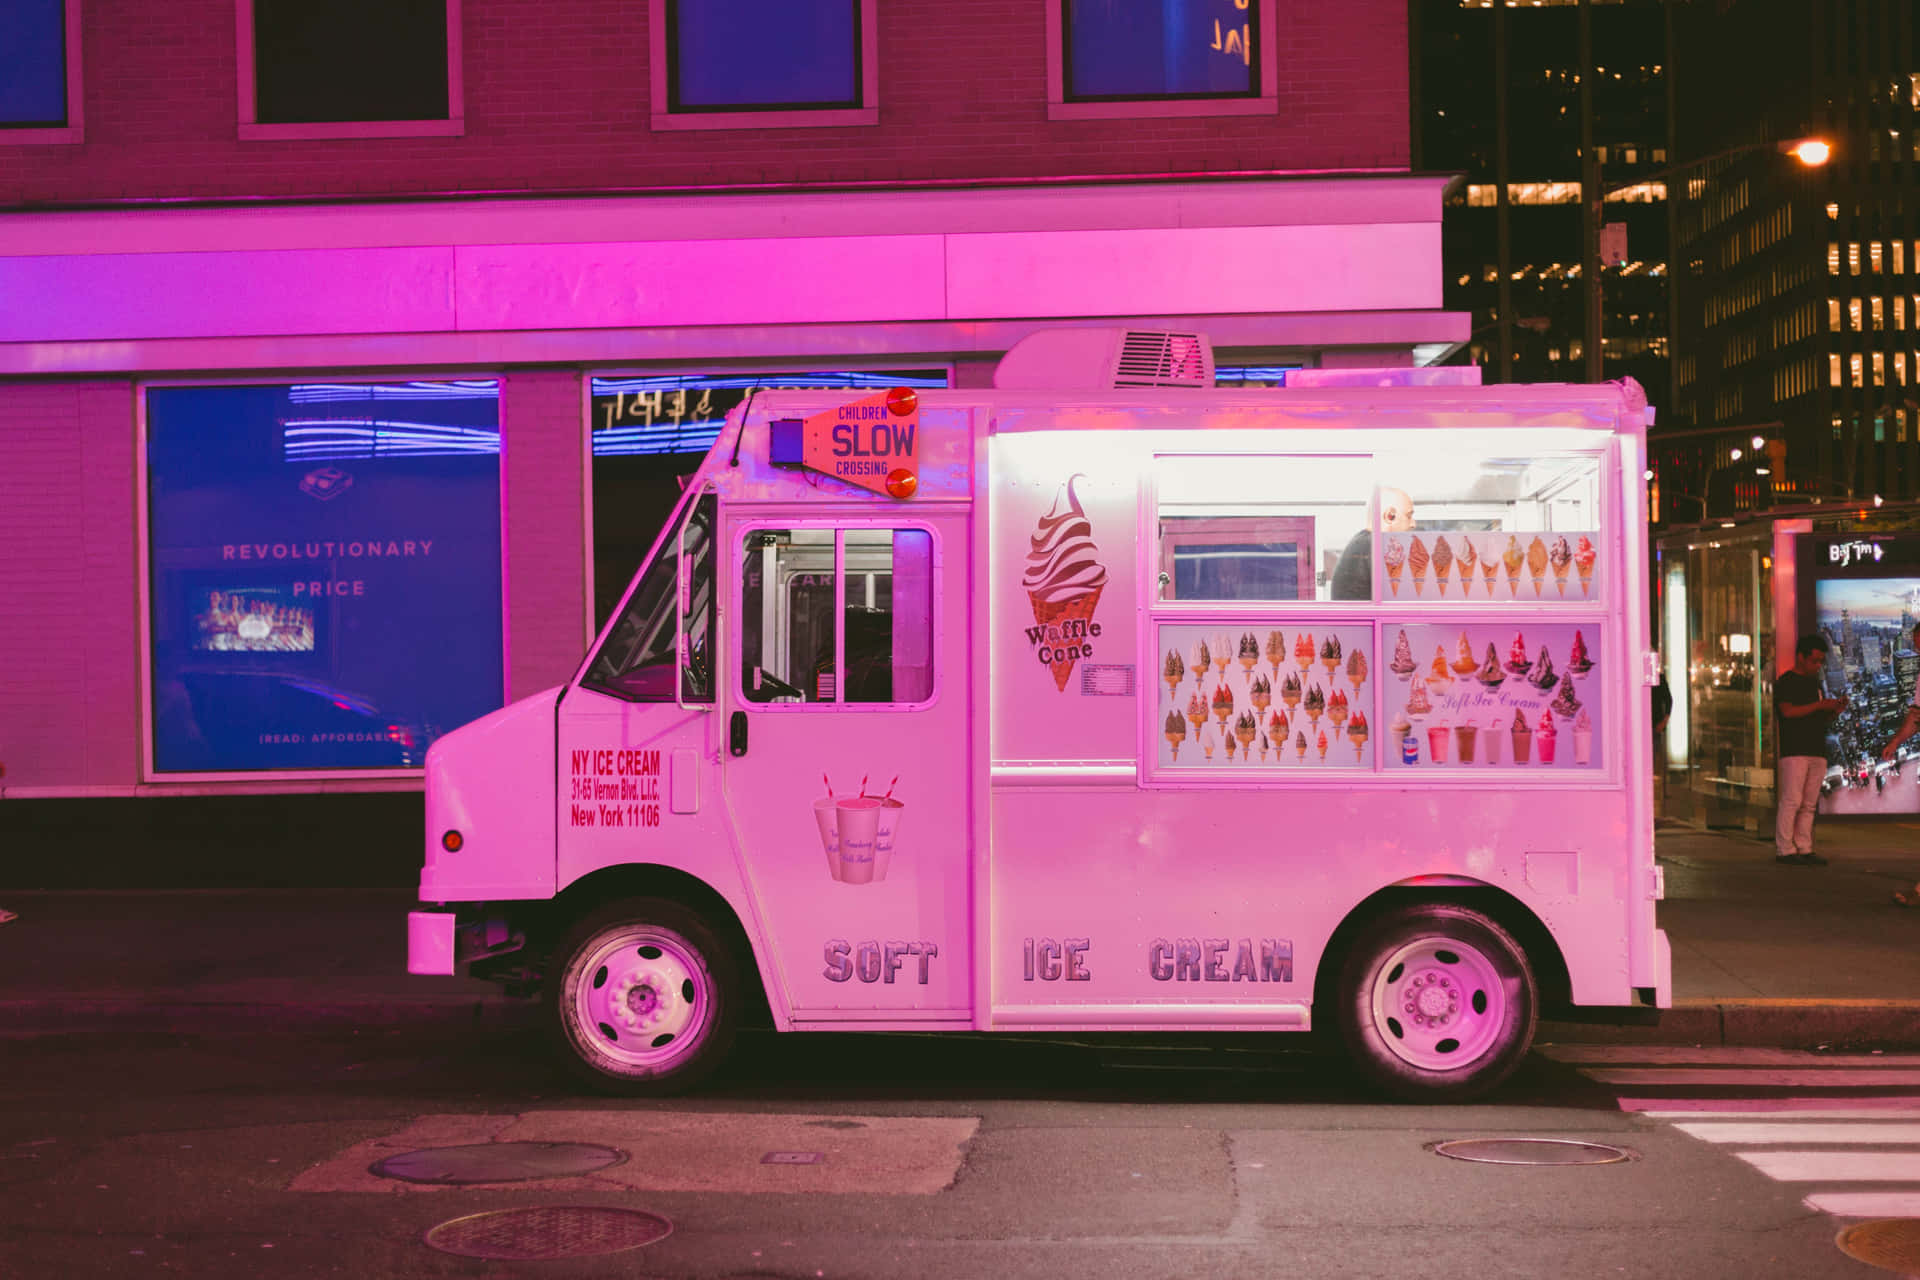 Get your summer treats from an ice cream truck!